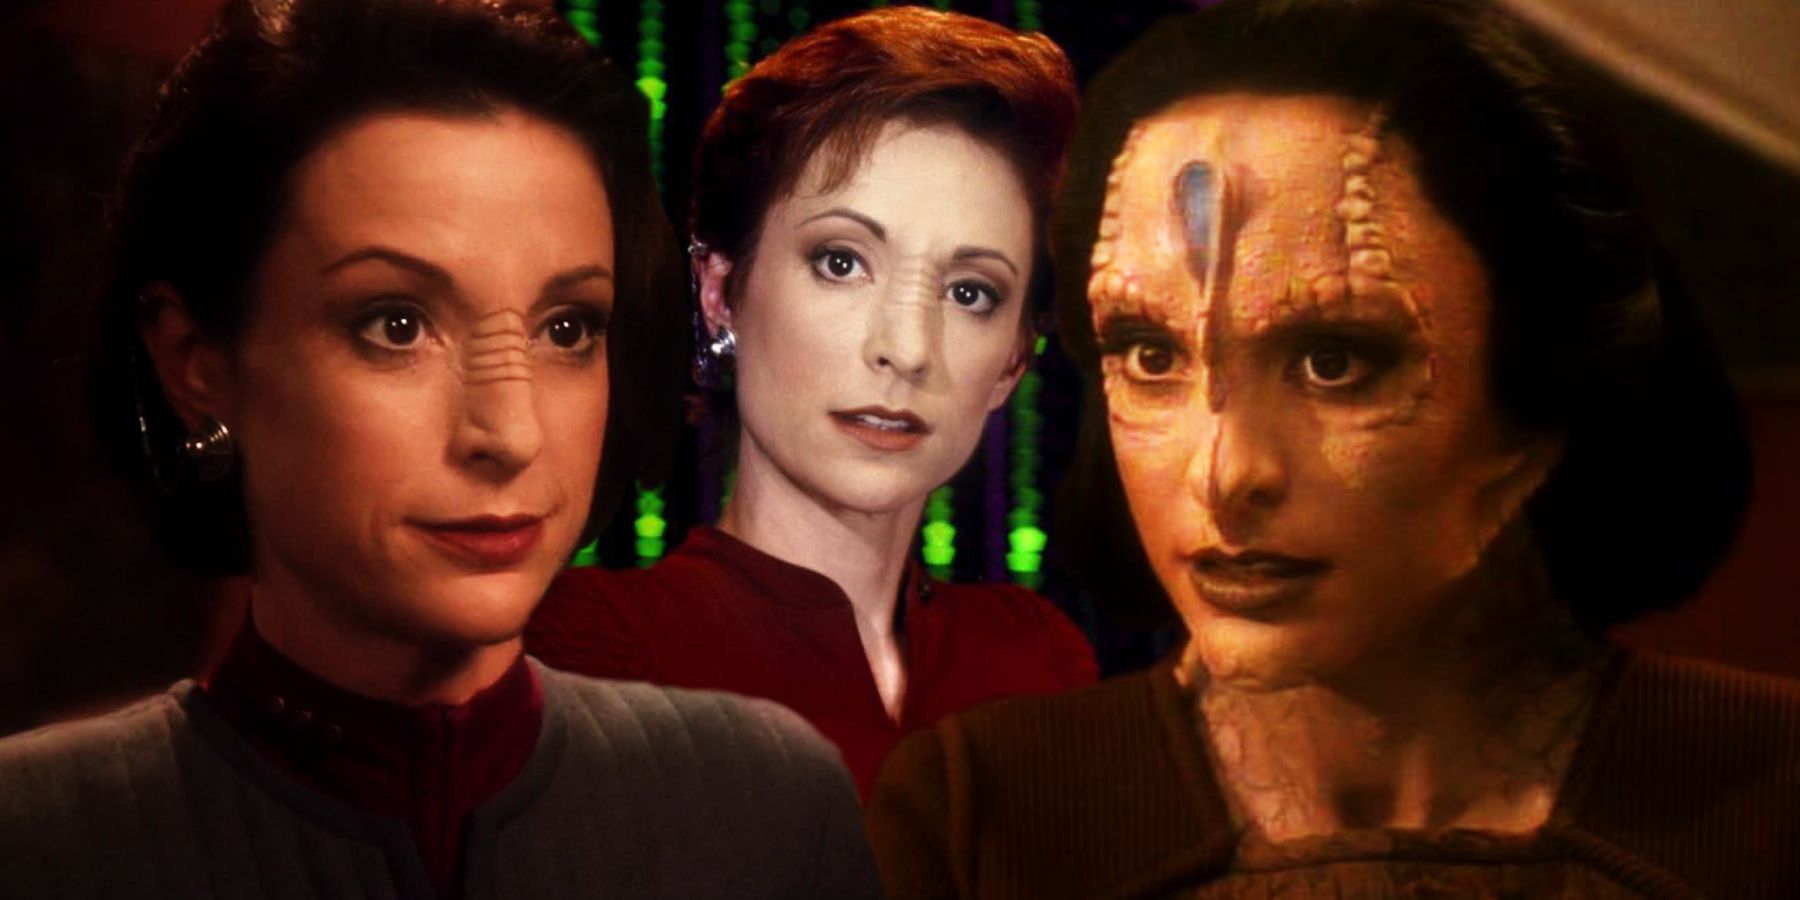 Star Trek Actors Say DS9 Had More Fire than Voyager (Literally)